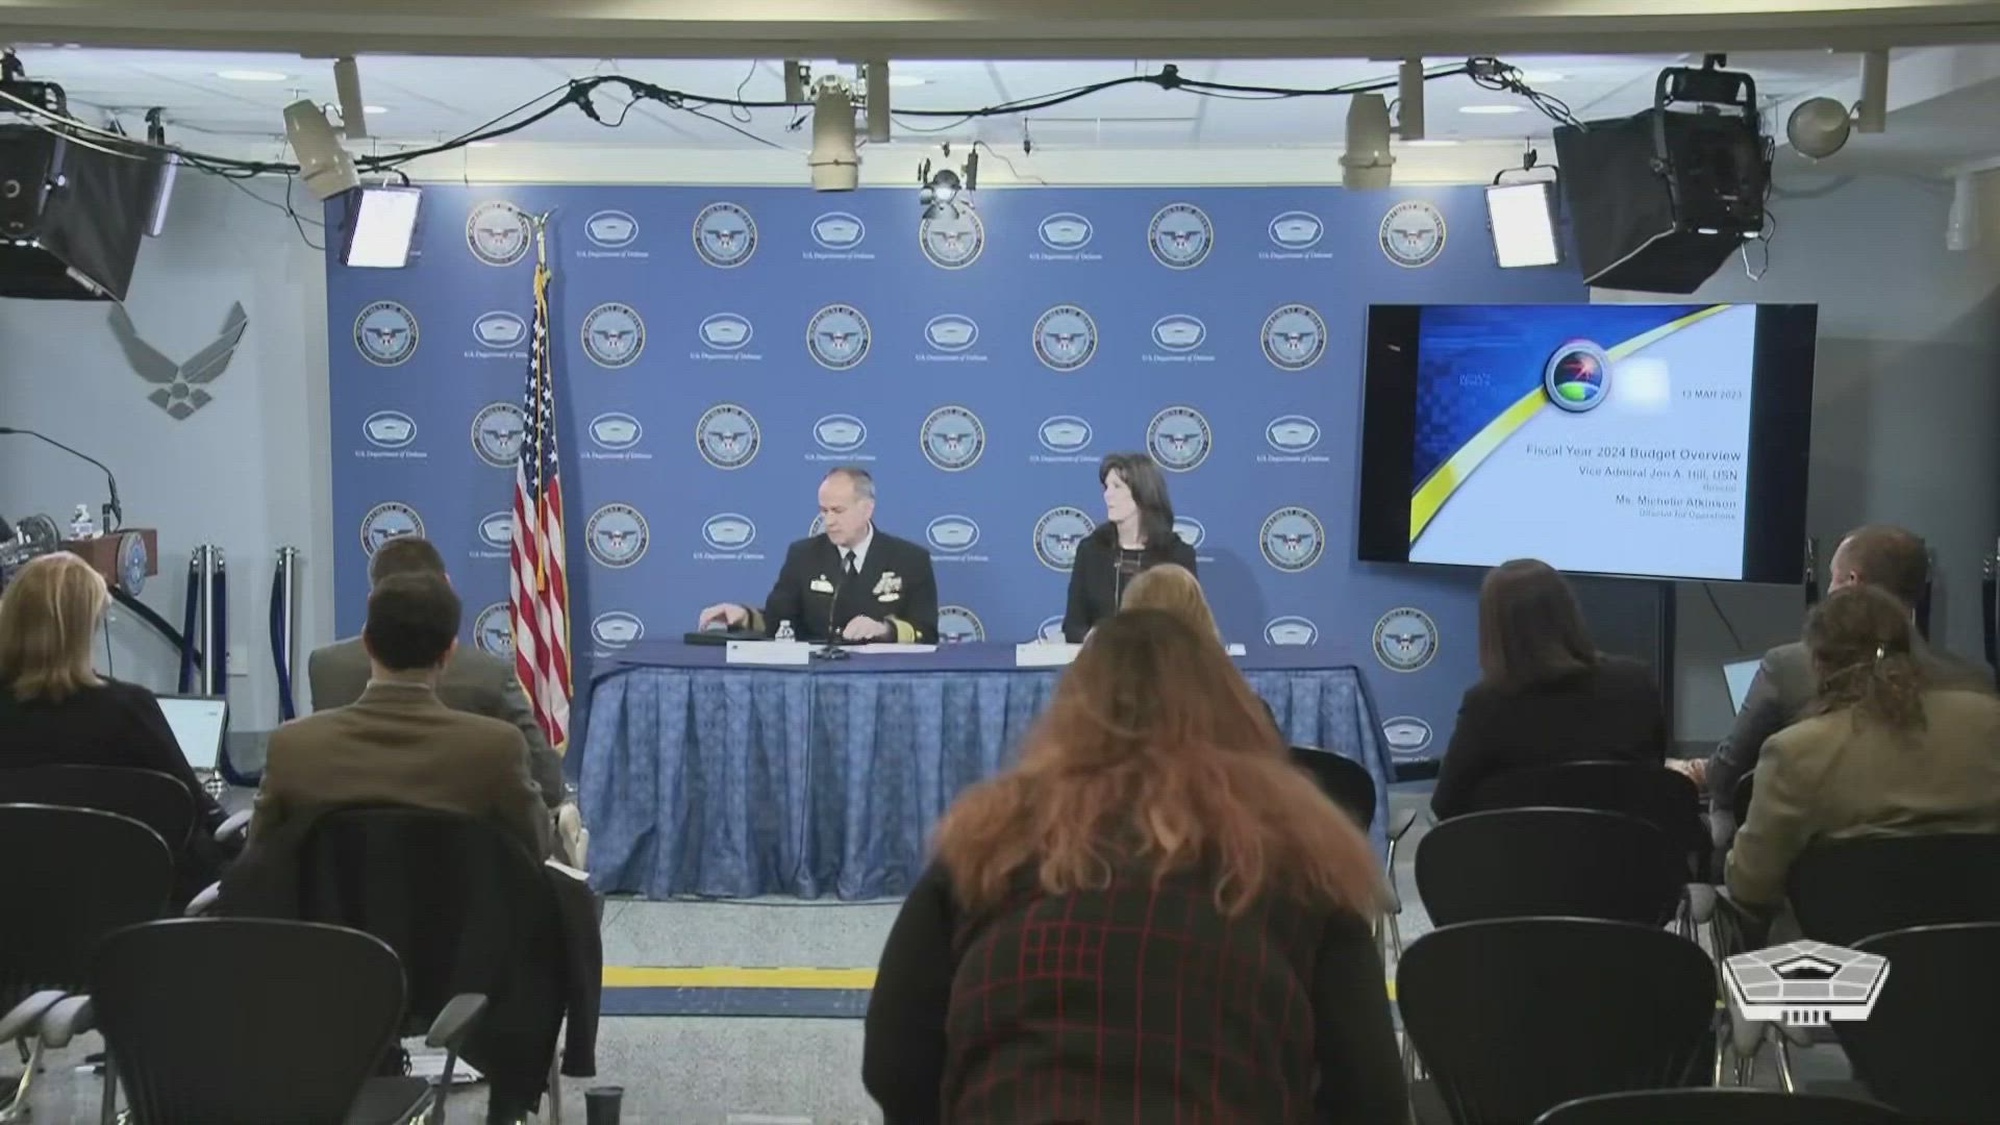 Navy Vice Adm. Jon A. Hill, Missile Defense Agency director, and Michelle C. Atkinson, Missile Defense Agency director for operations, discuss the fiscal year 2024 budget.